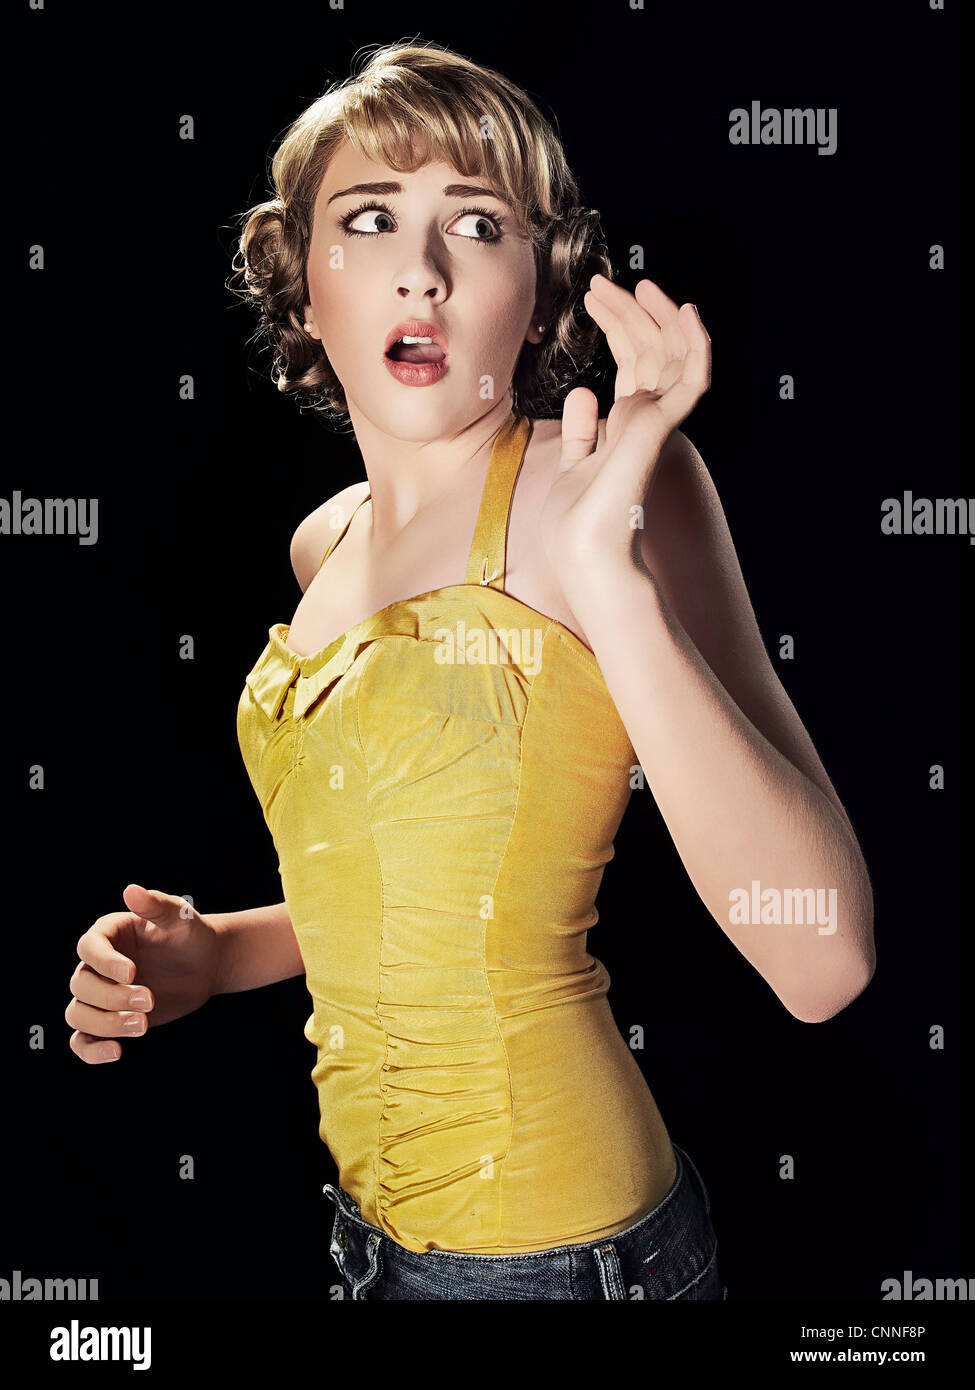 Frightened girl gasping Stock Photo